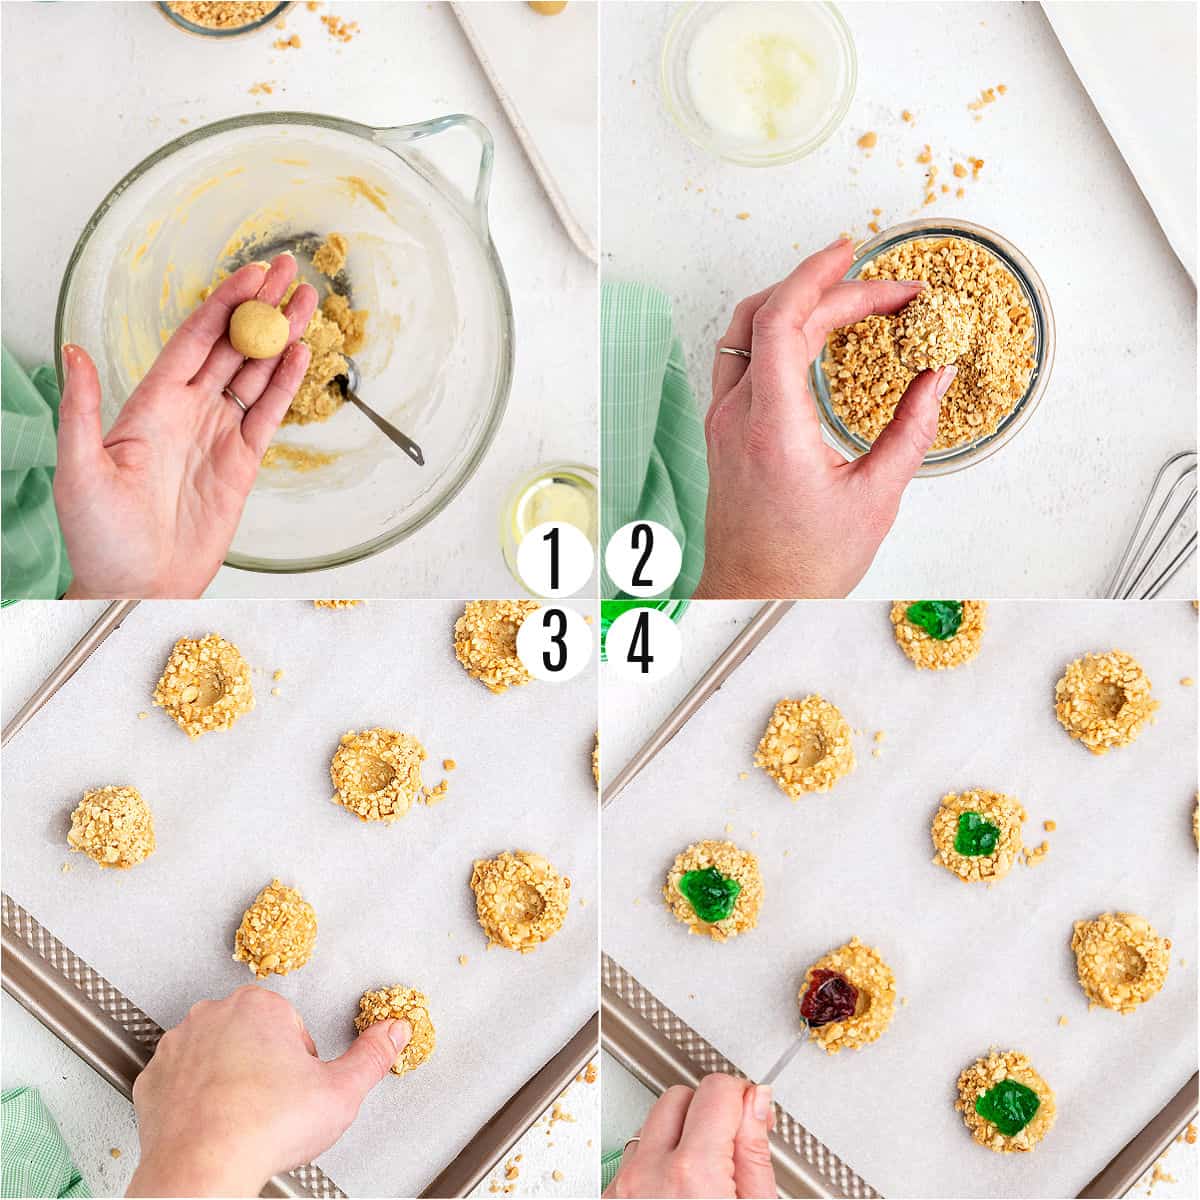 Step by step photos showing how to make thumbprint cookies.